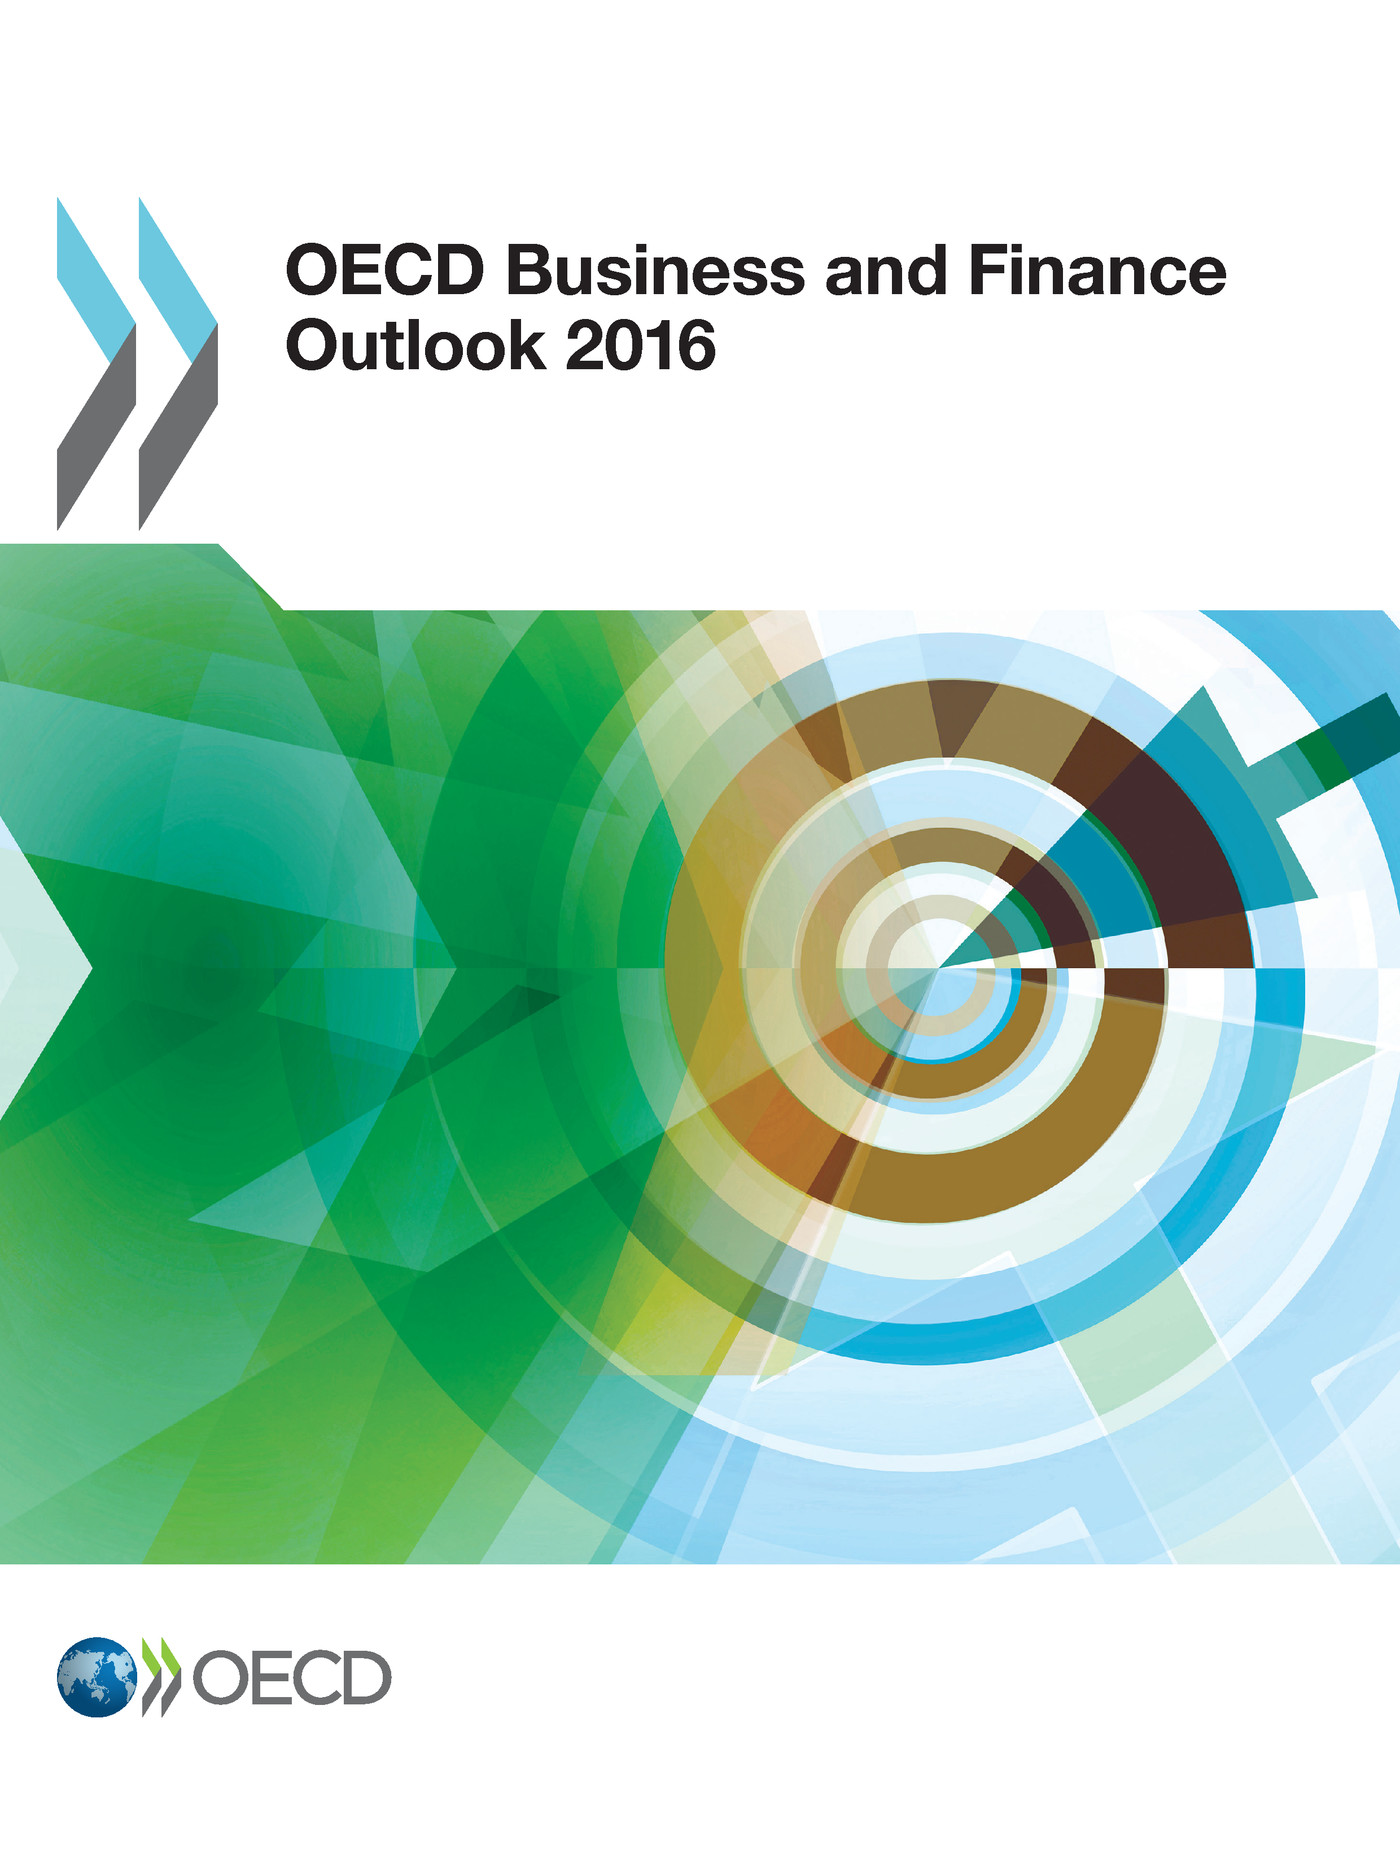 OECD Business and Finance Outlook 2016 -  Collectif - OCDE / OECD